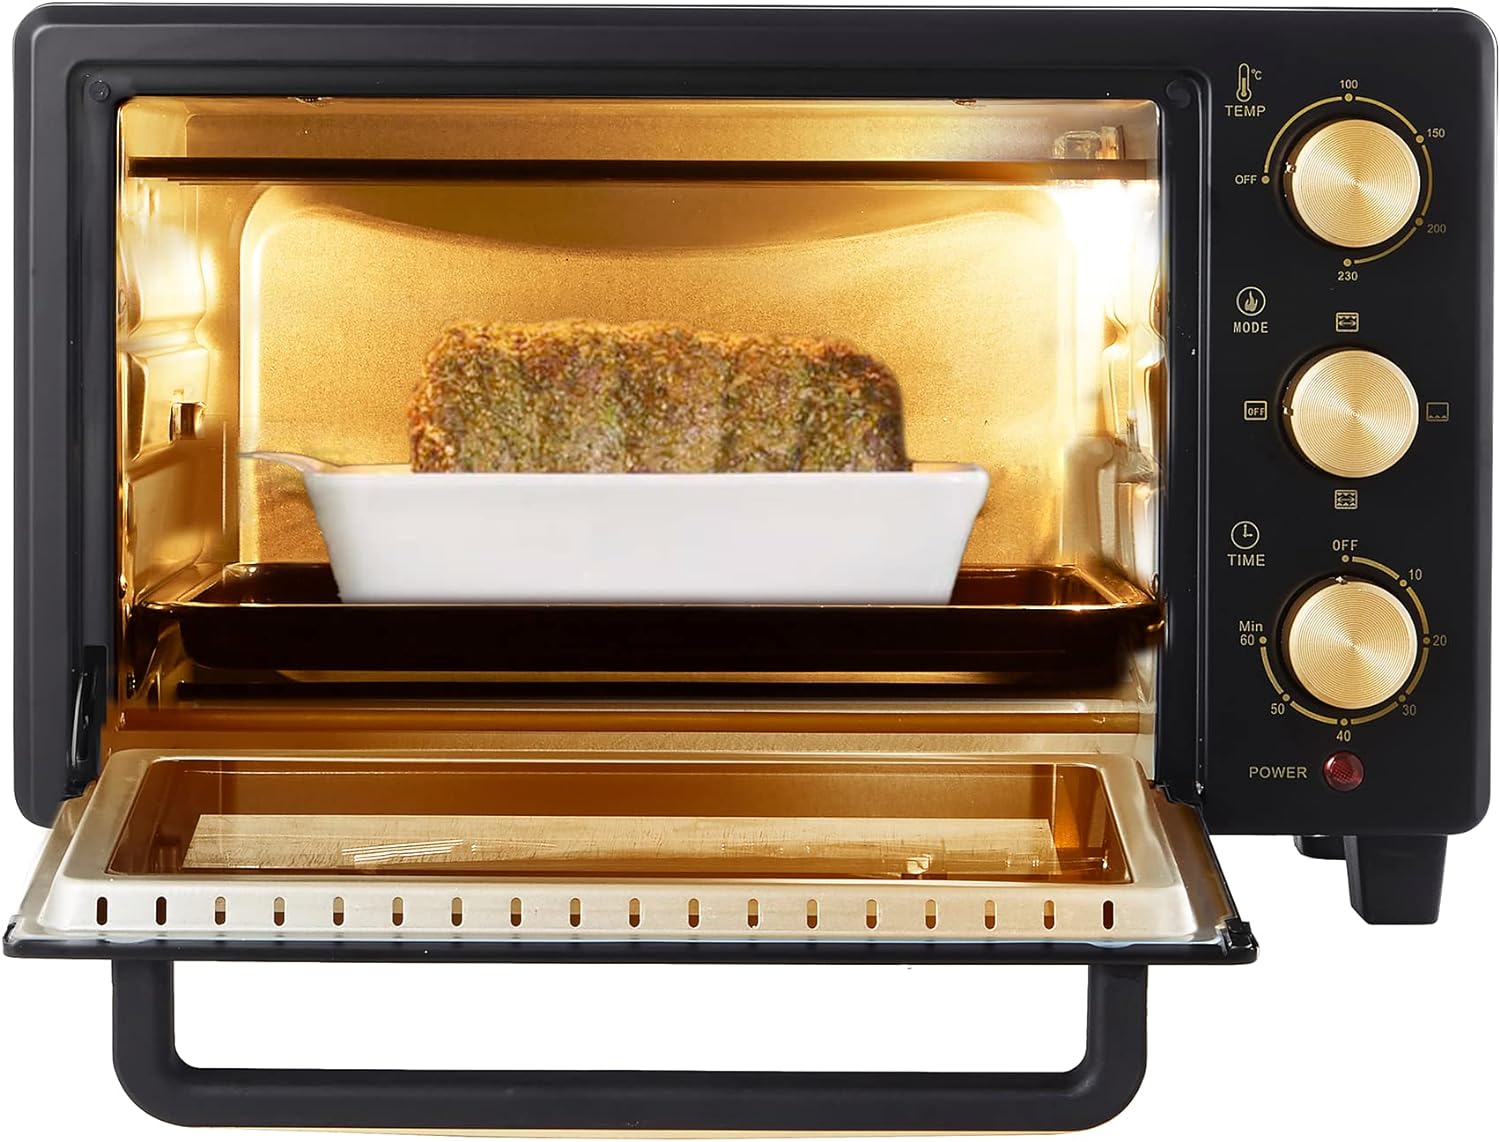 Belaco 23L Toaster Oven Tabletop Cooking Baking Portable Oven Rotiseerie1380w 60 min Timer with auto shut off 100-250° Stainless Steel Heating Tube incl. Baking Tray, Wire Rack, Handle, Rotisserie… [Energy Class A+]